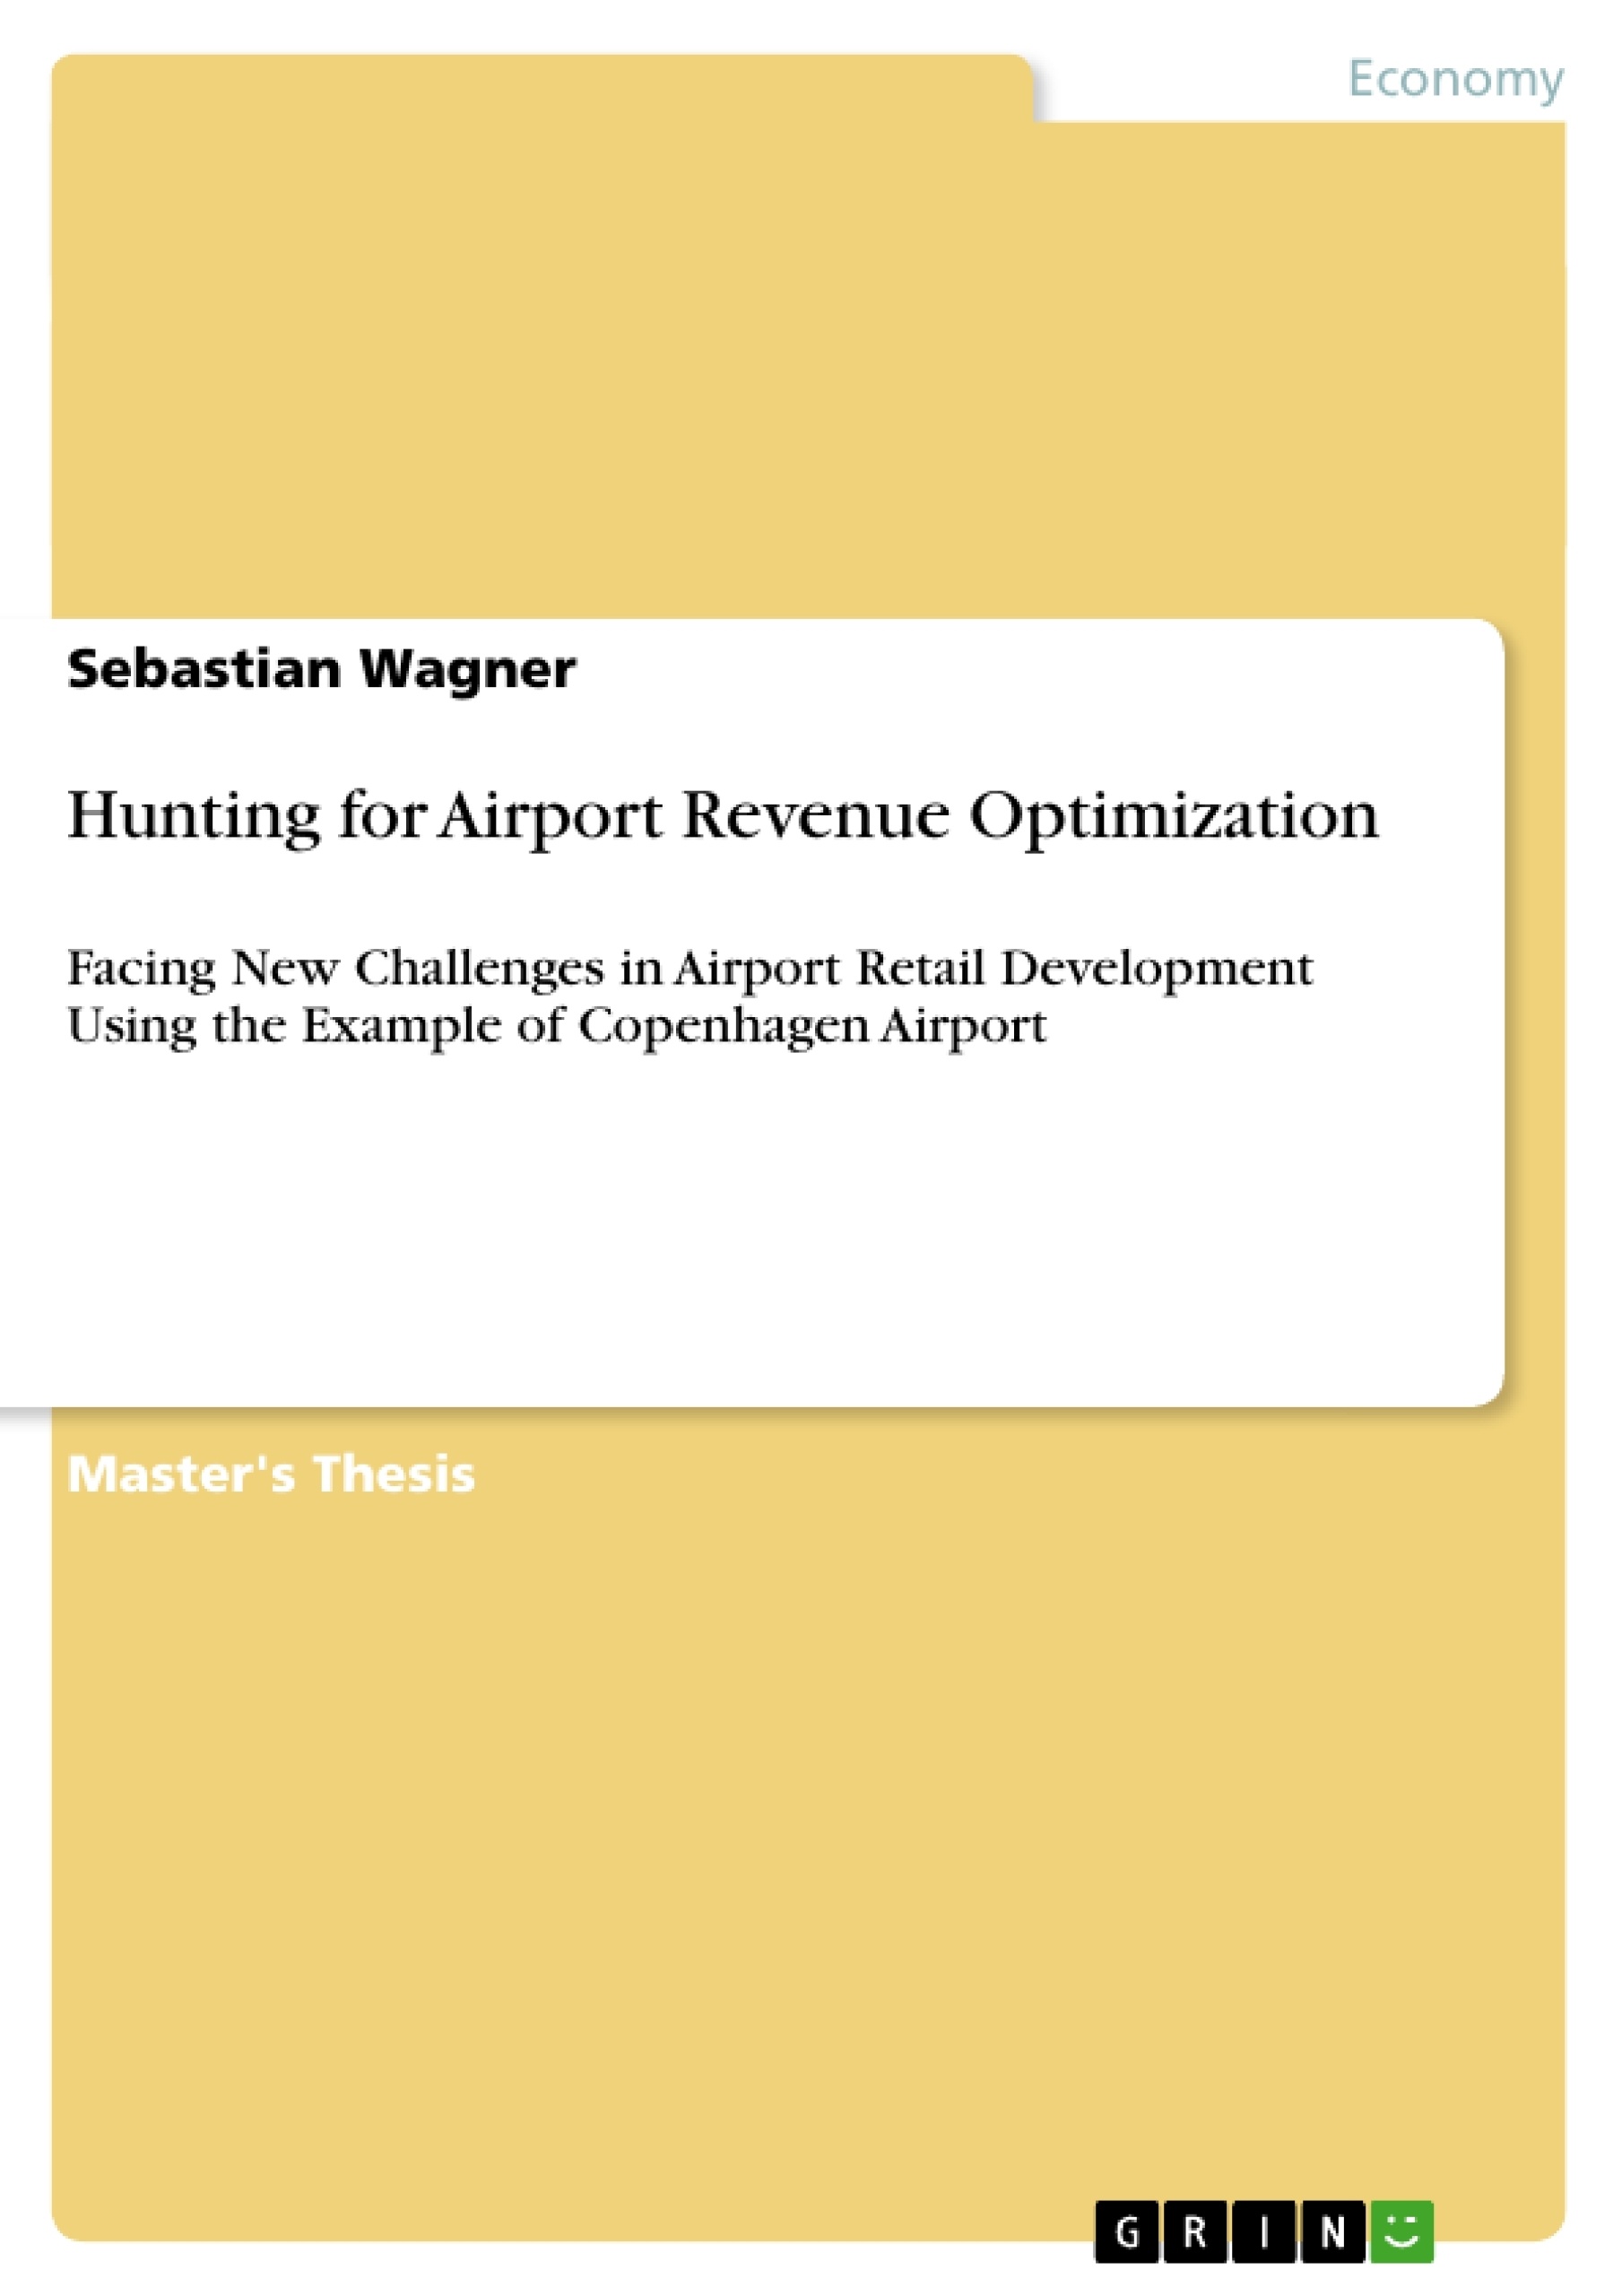 Titre: Hunting for Airport Revenue Optimization